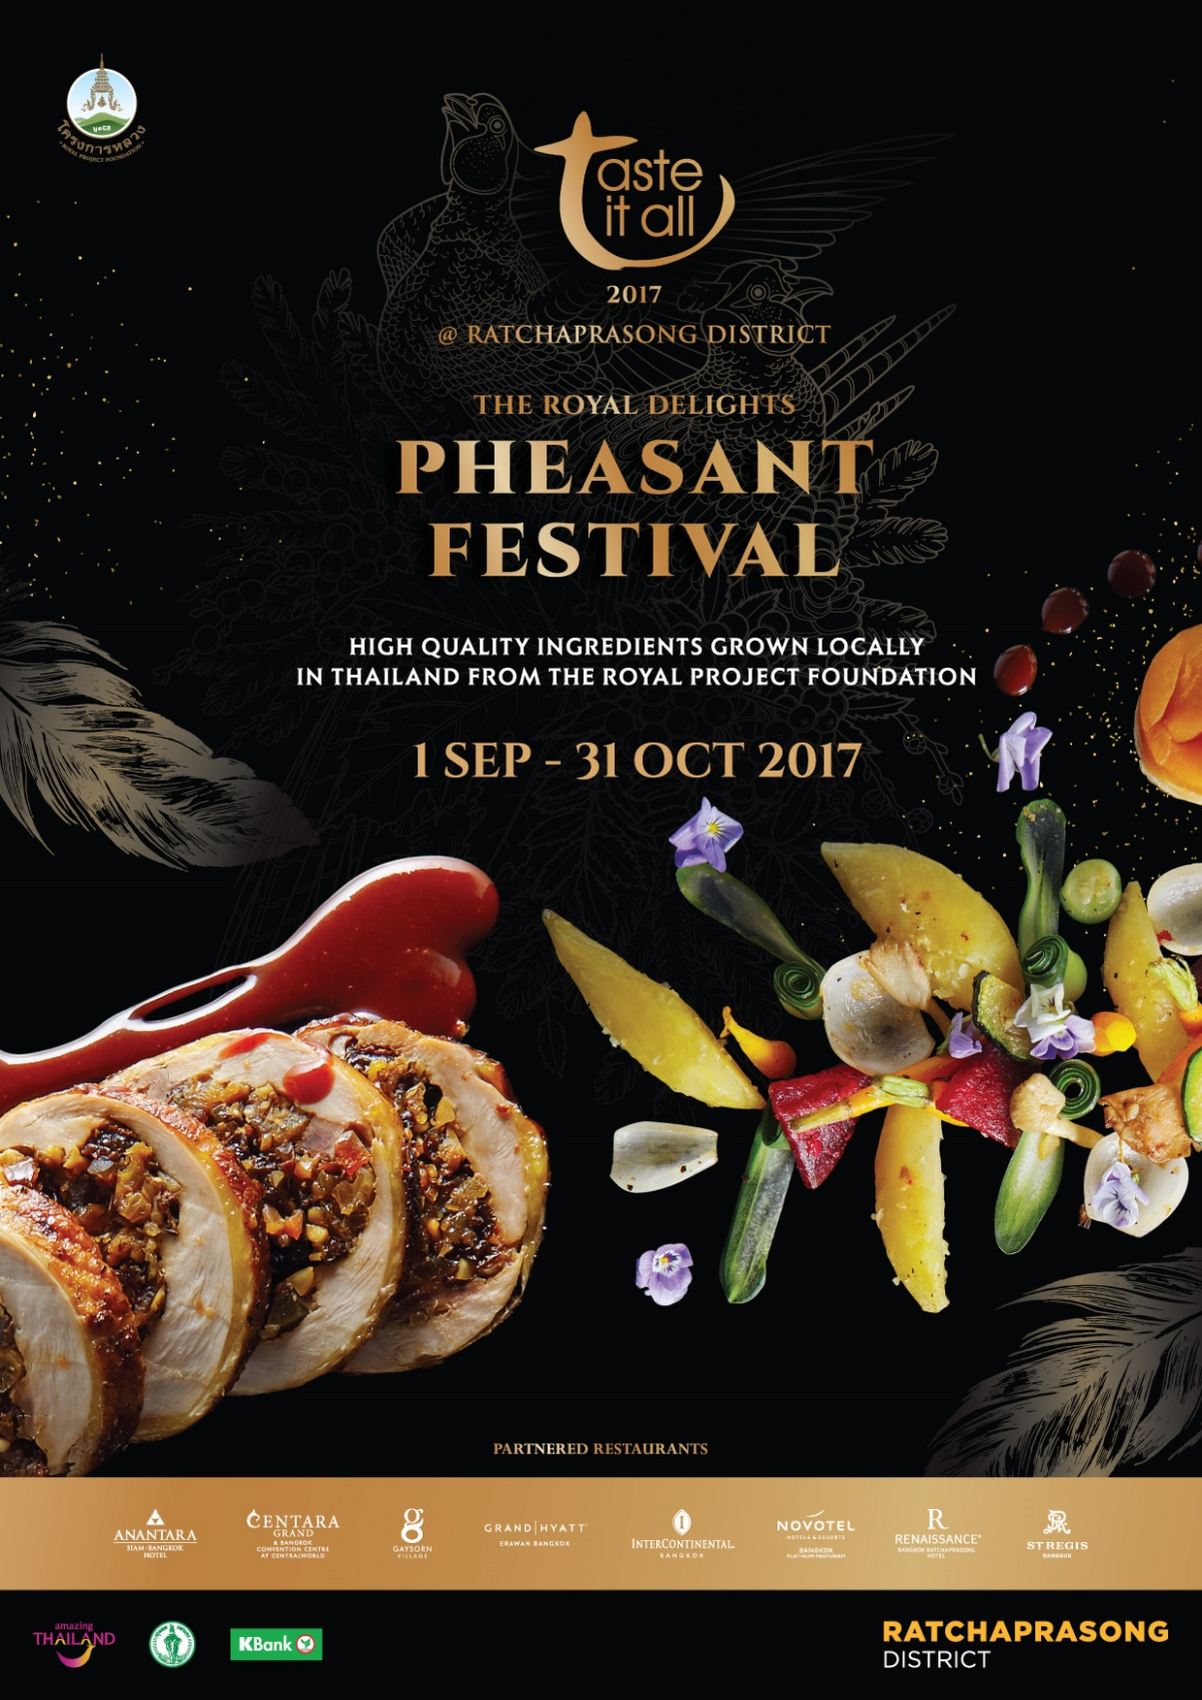 Taste it all 2017 @Ratchaprasong: The Royal Delights - Pheasant Festival